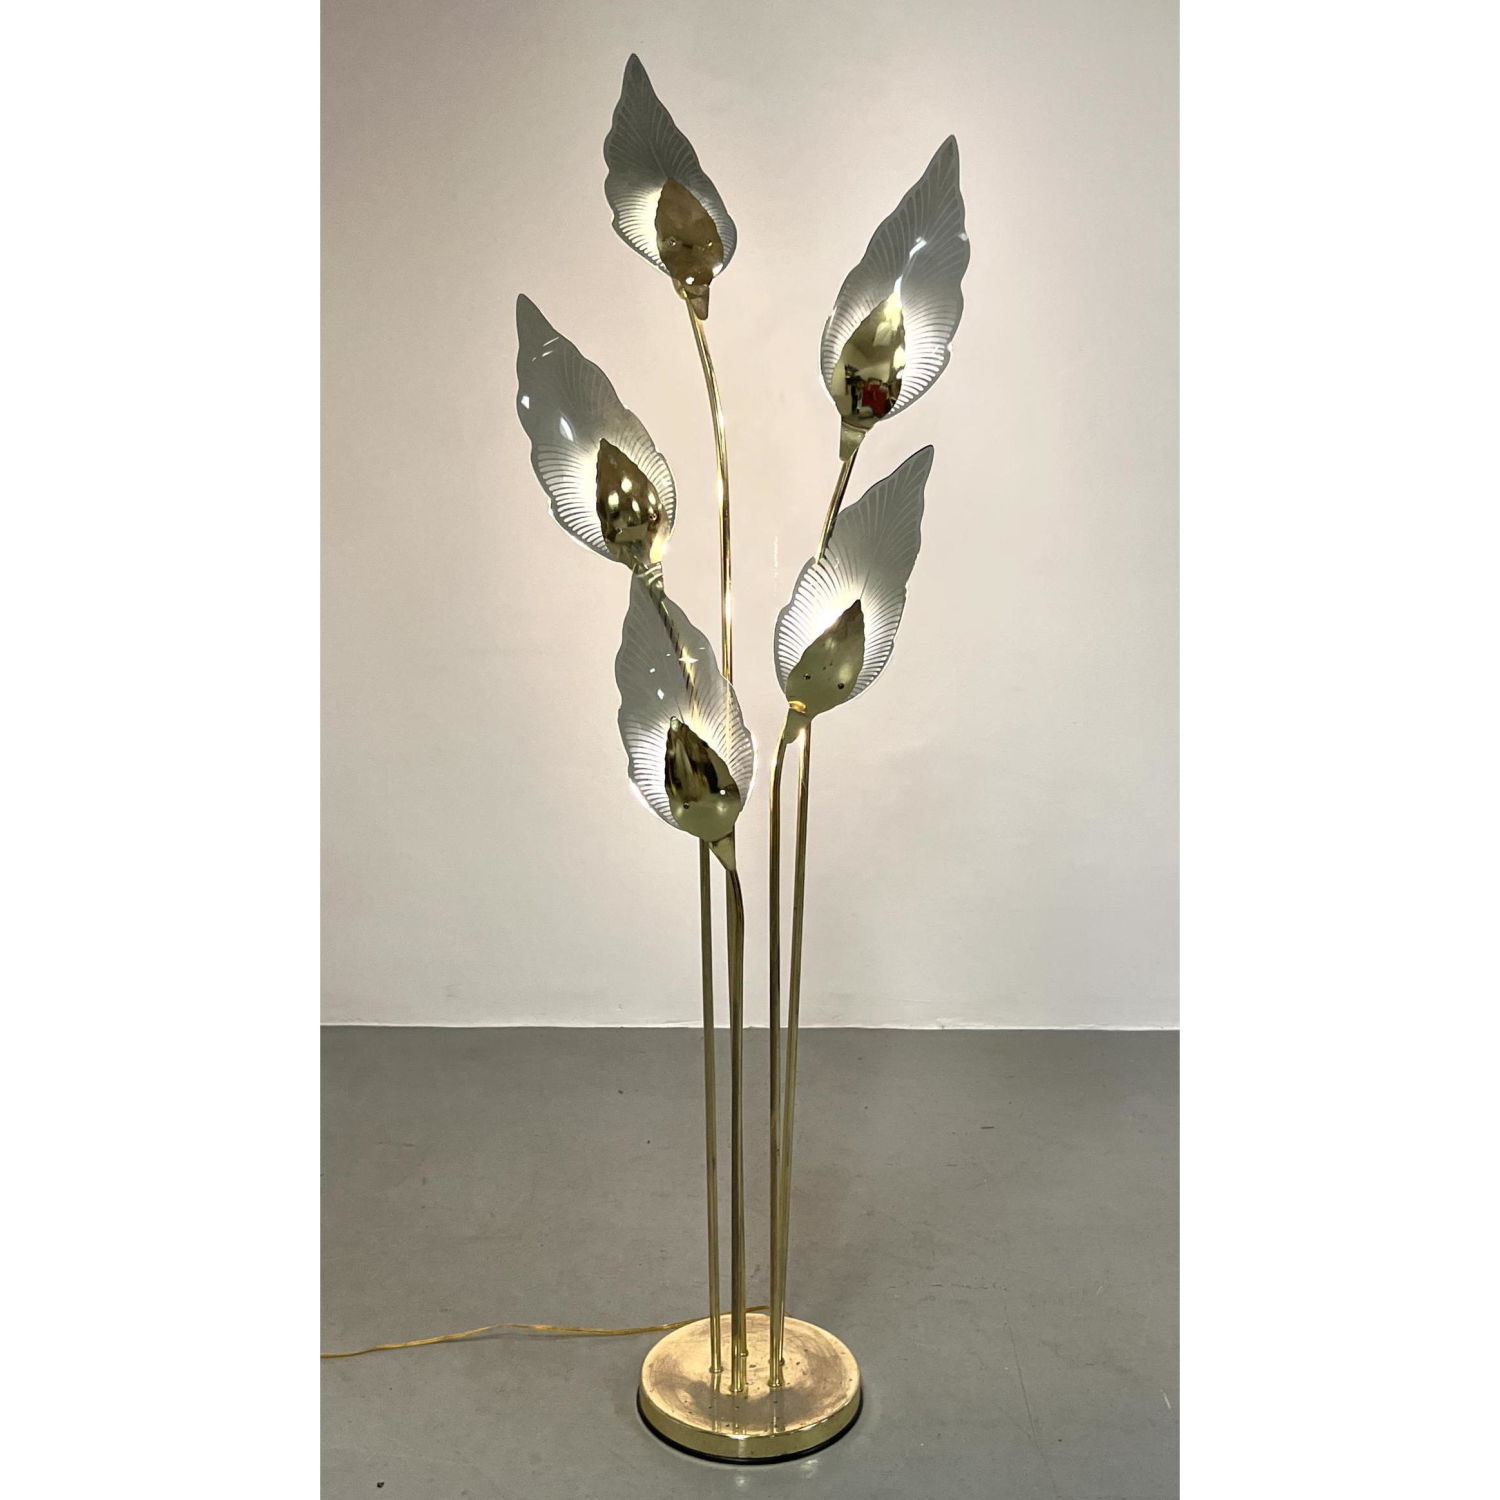 Brass and Glass Floor Lamp. 5 Glass